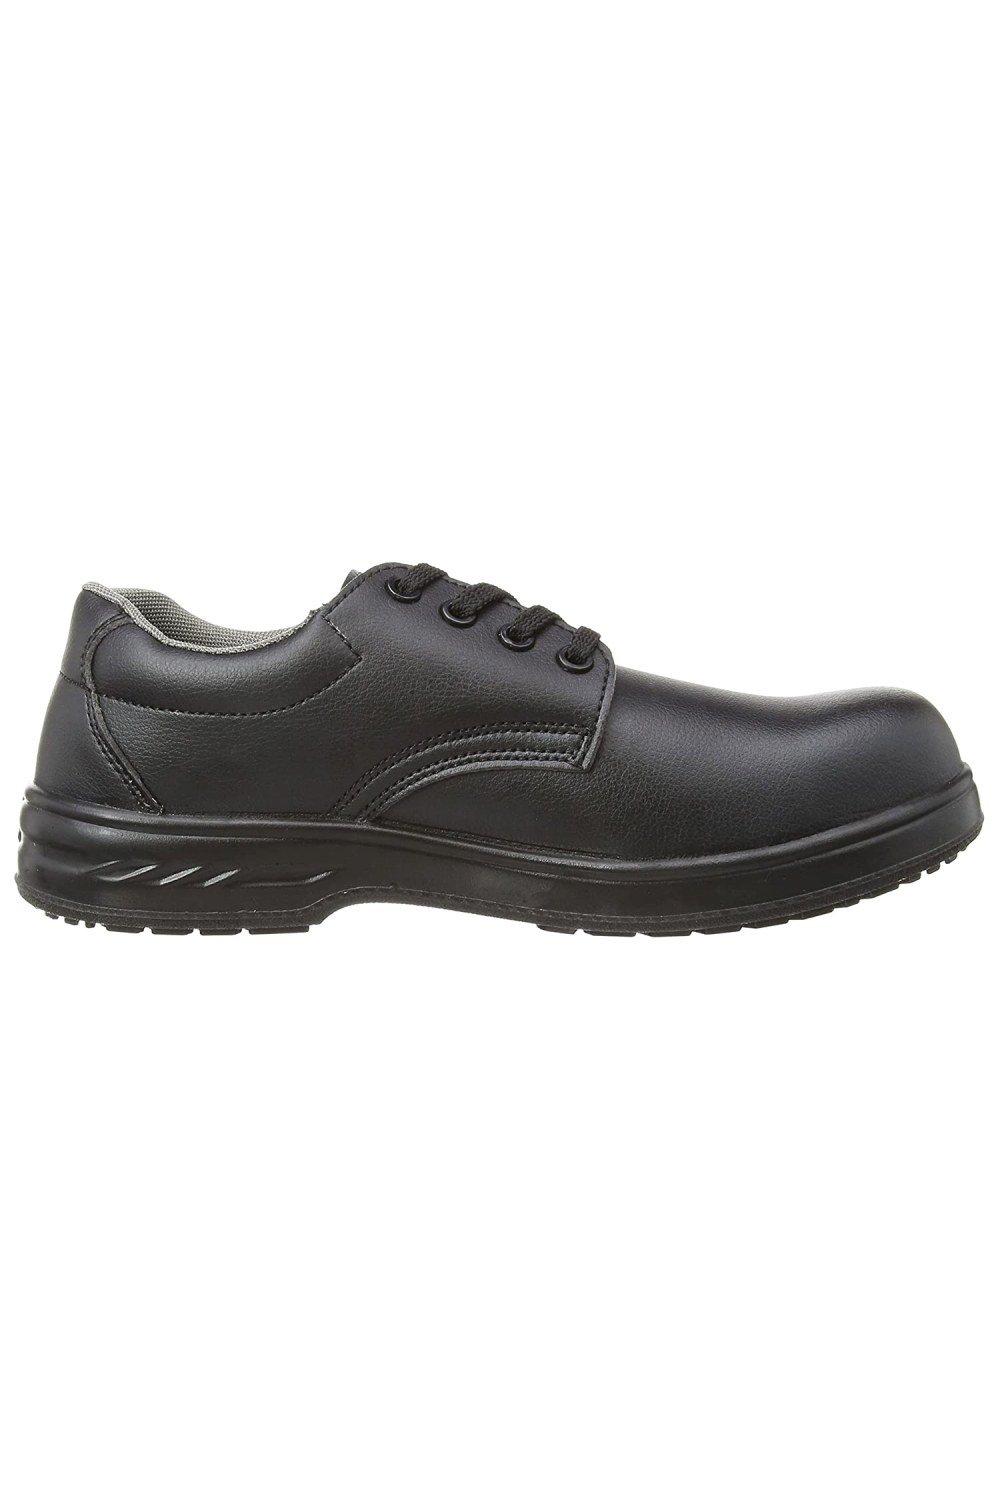 Steelite Laced Safety Shoes S2 (FW80) Workwear